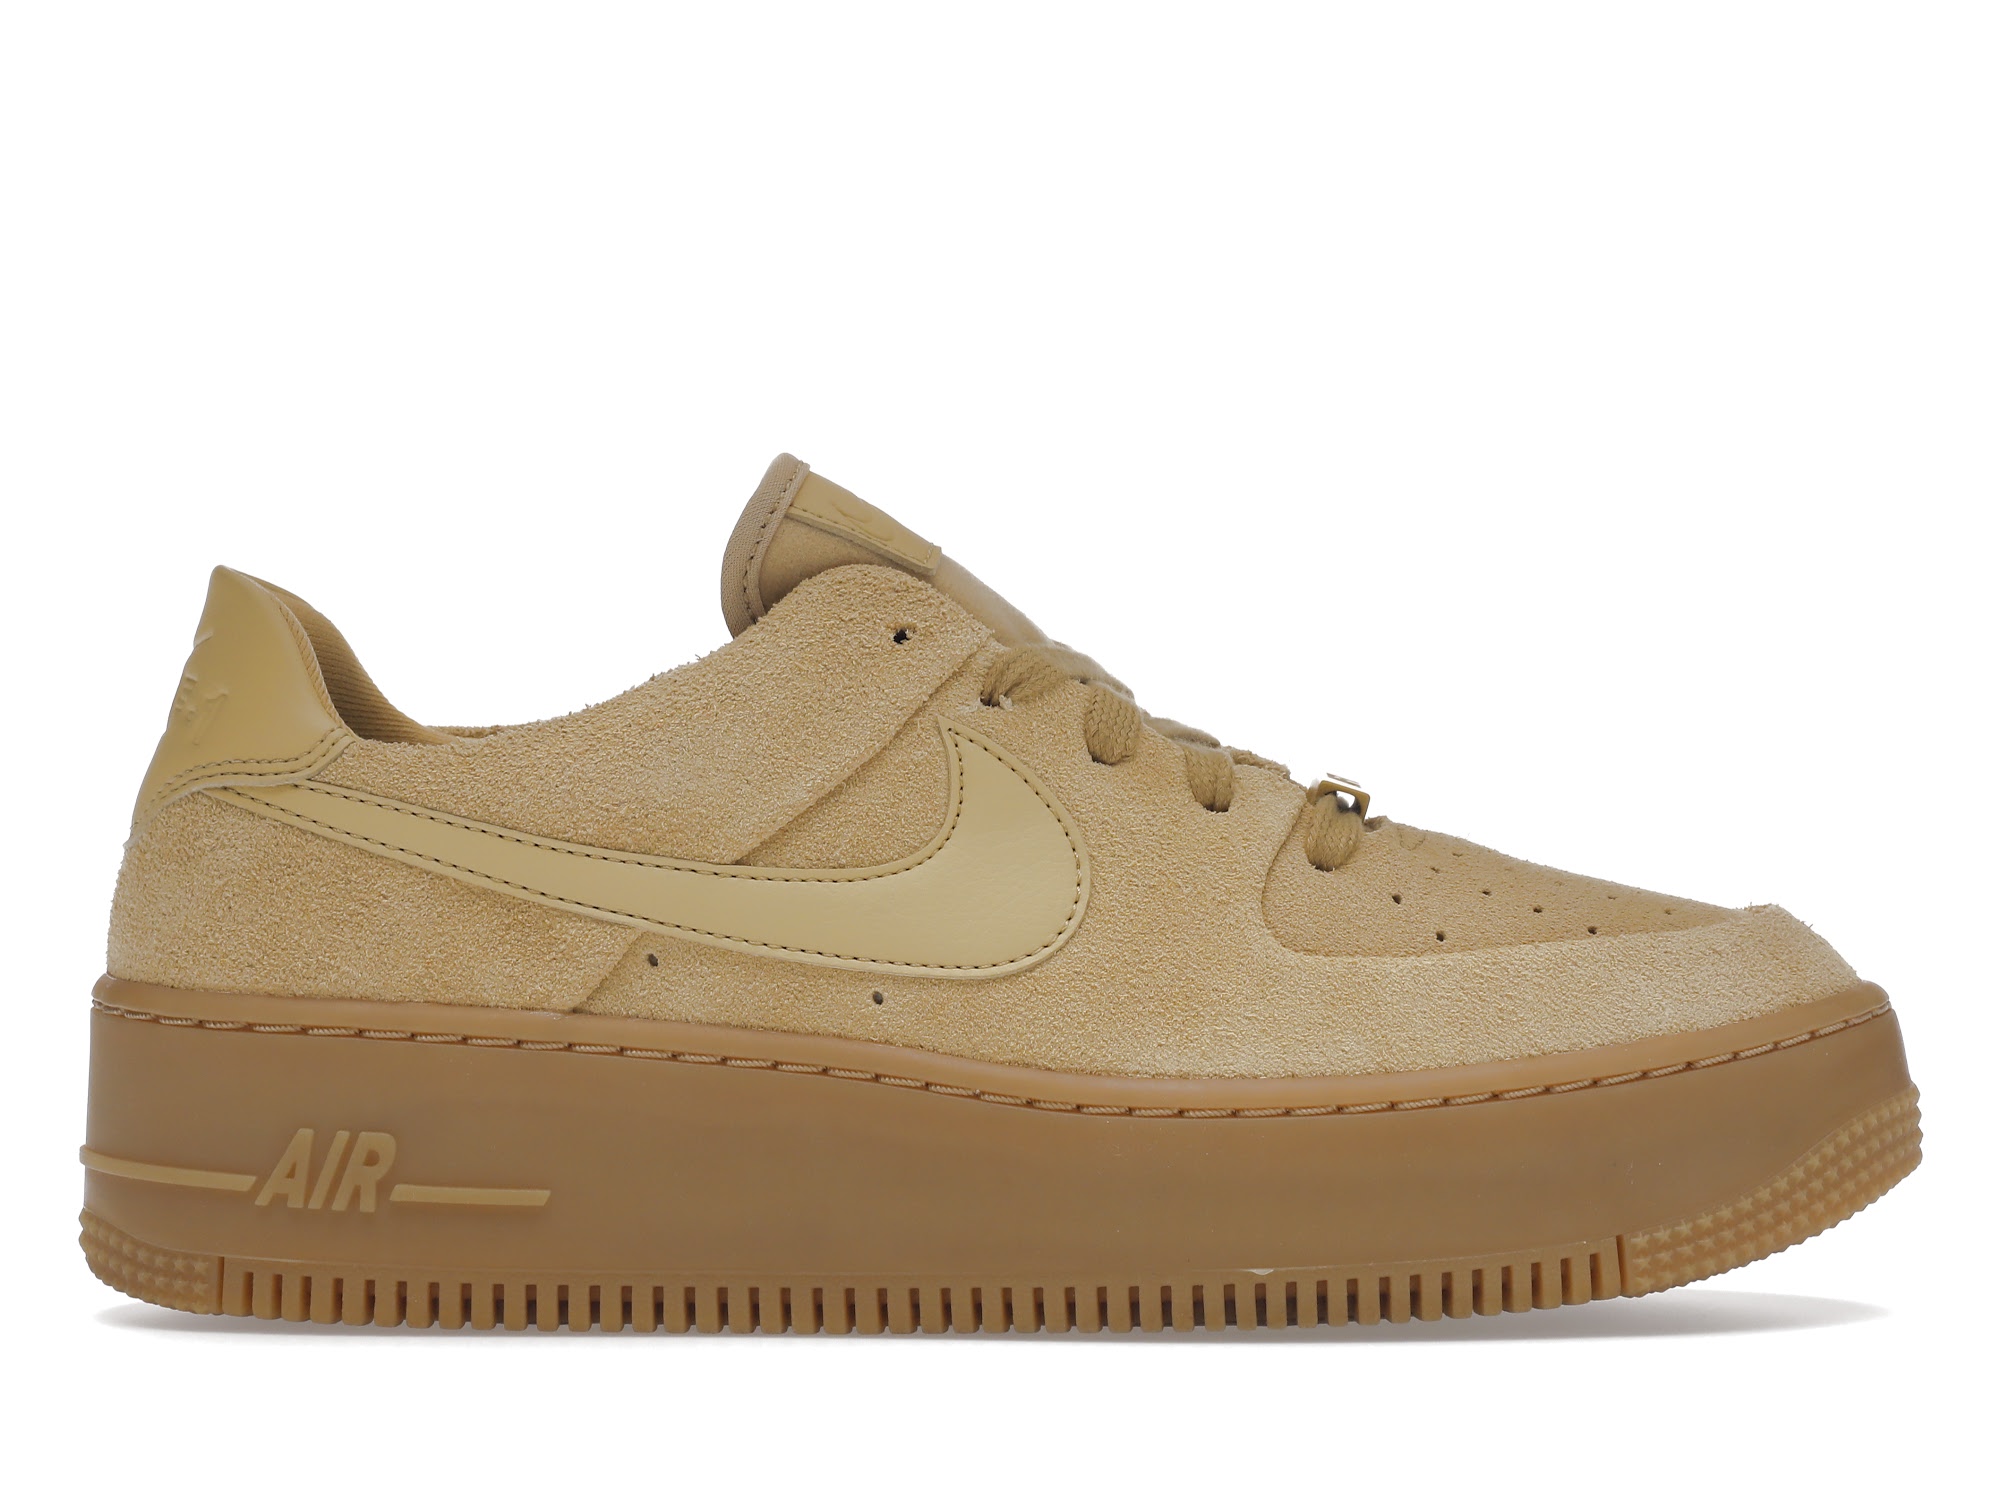 Nike Air Force 1 Sage Low Club Gold (Women's) - CT3432-700 - US